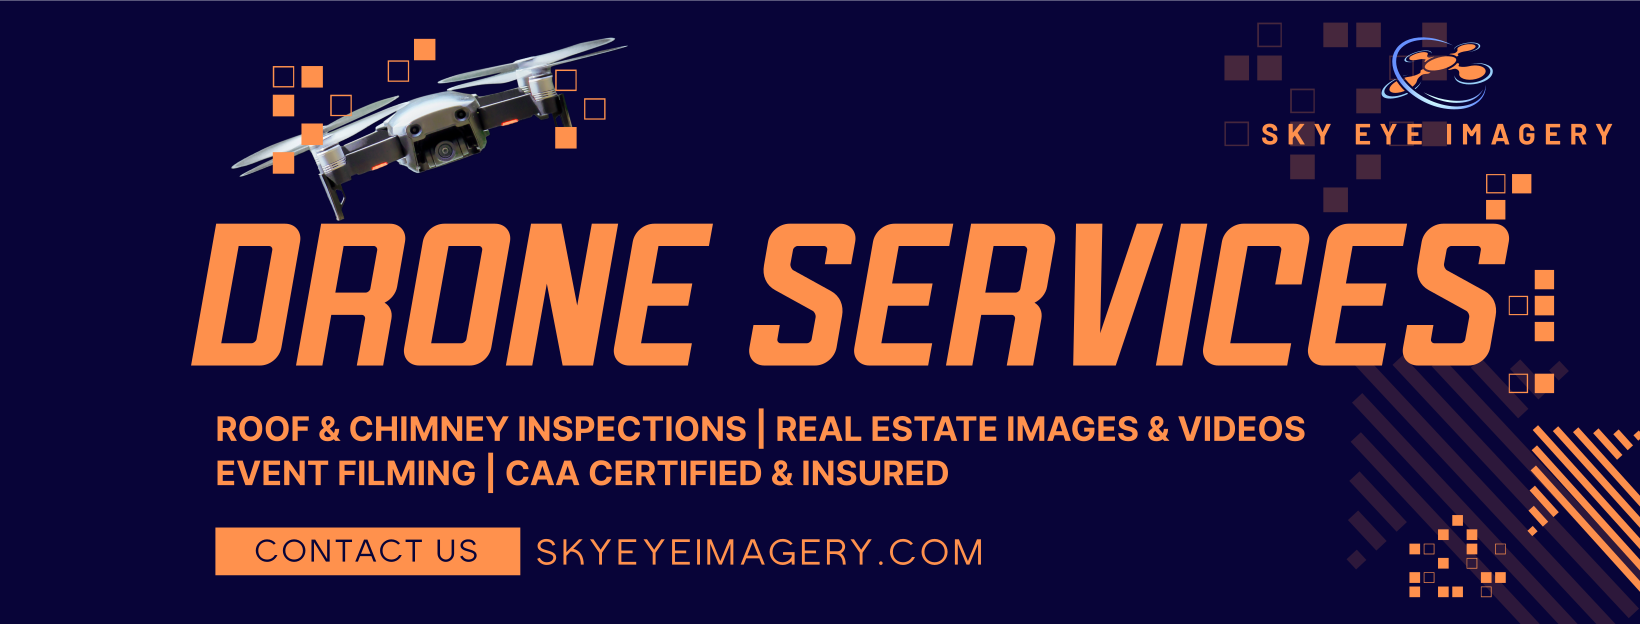 Sky eye imagery drone imaging services. Visit https://skyeyeimagery. Com